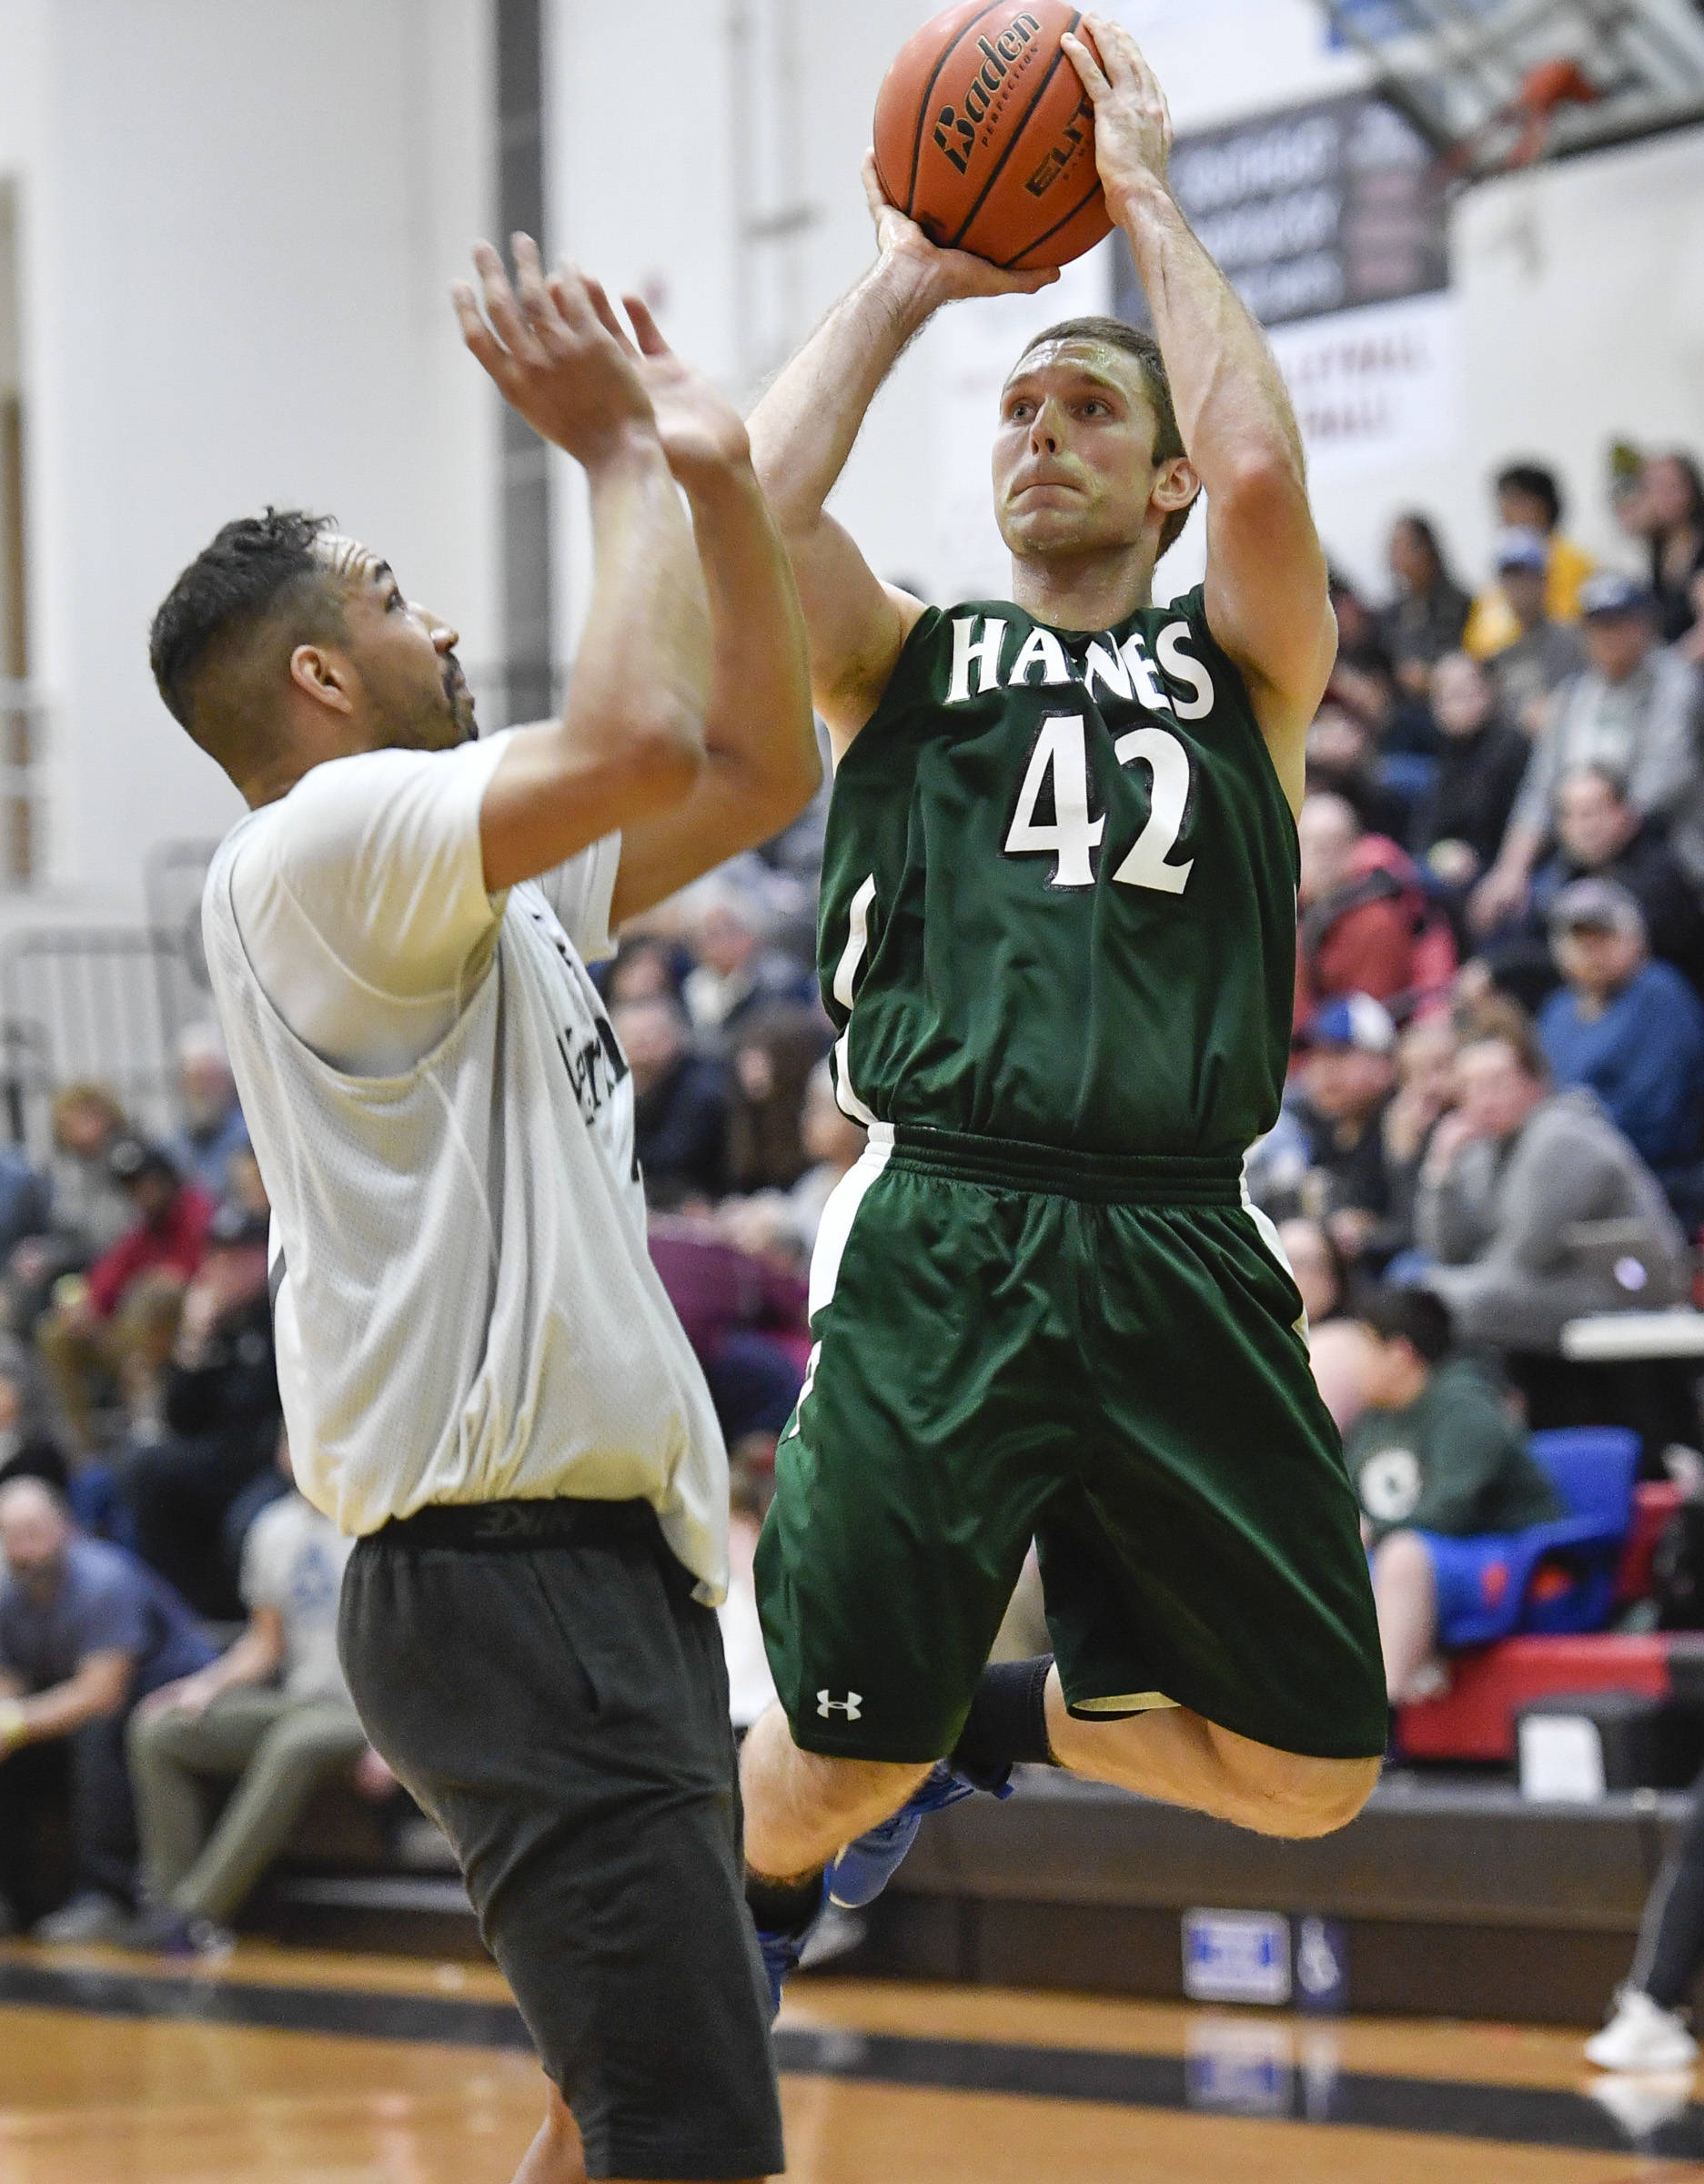 Haines’ Kyle Fossman, right, shoot against Metlakatla’s Chris Bryant in their B bracket game at the Juneau Lions Club 73rd Annual Gold Medal Basketball Tournament at Juneau-Douglas High School on Friday, March 22, 2019. (Michael Penn | Juneau Empire)